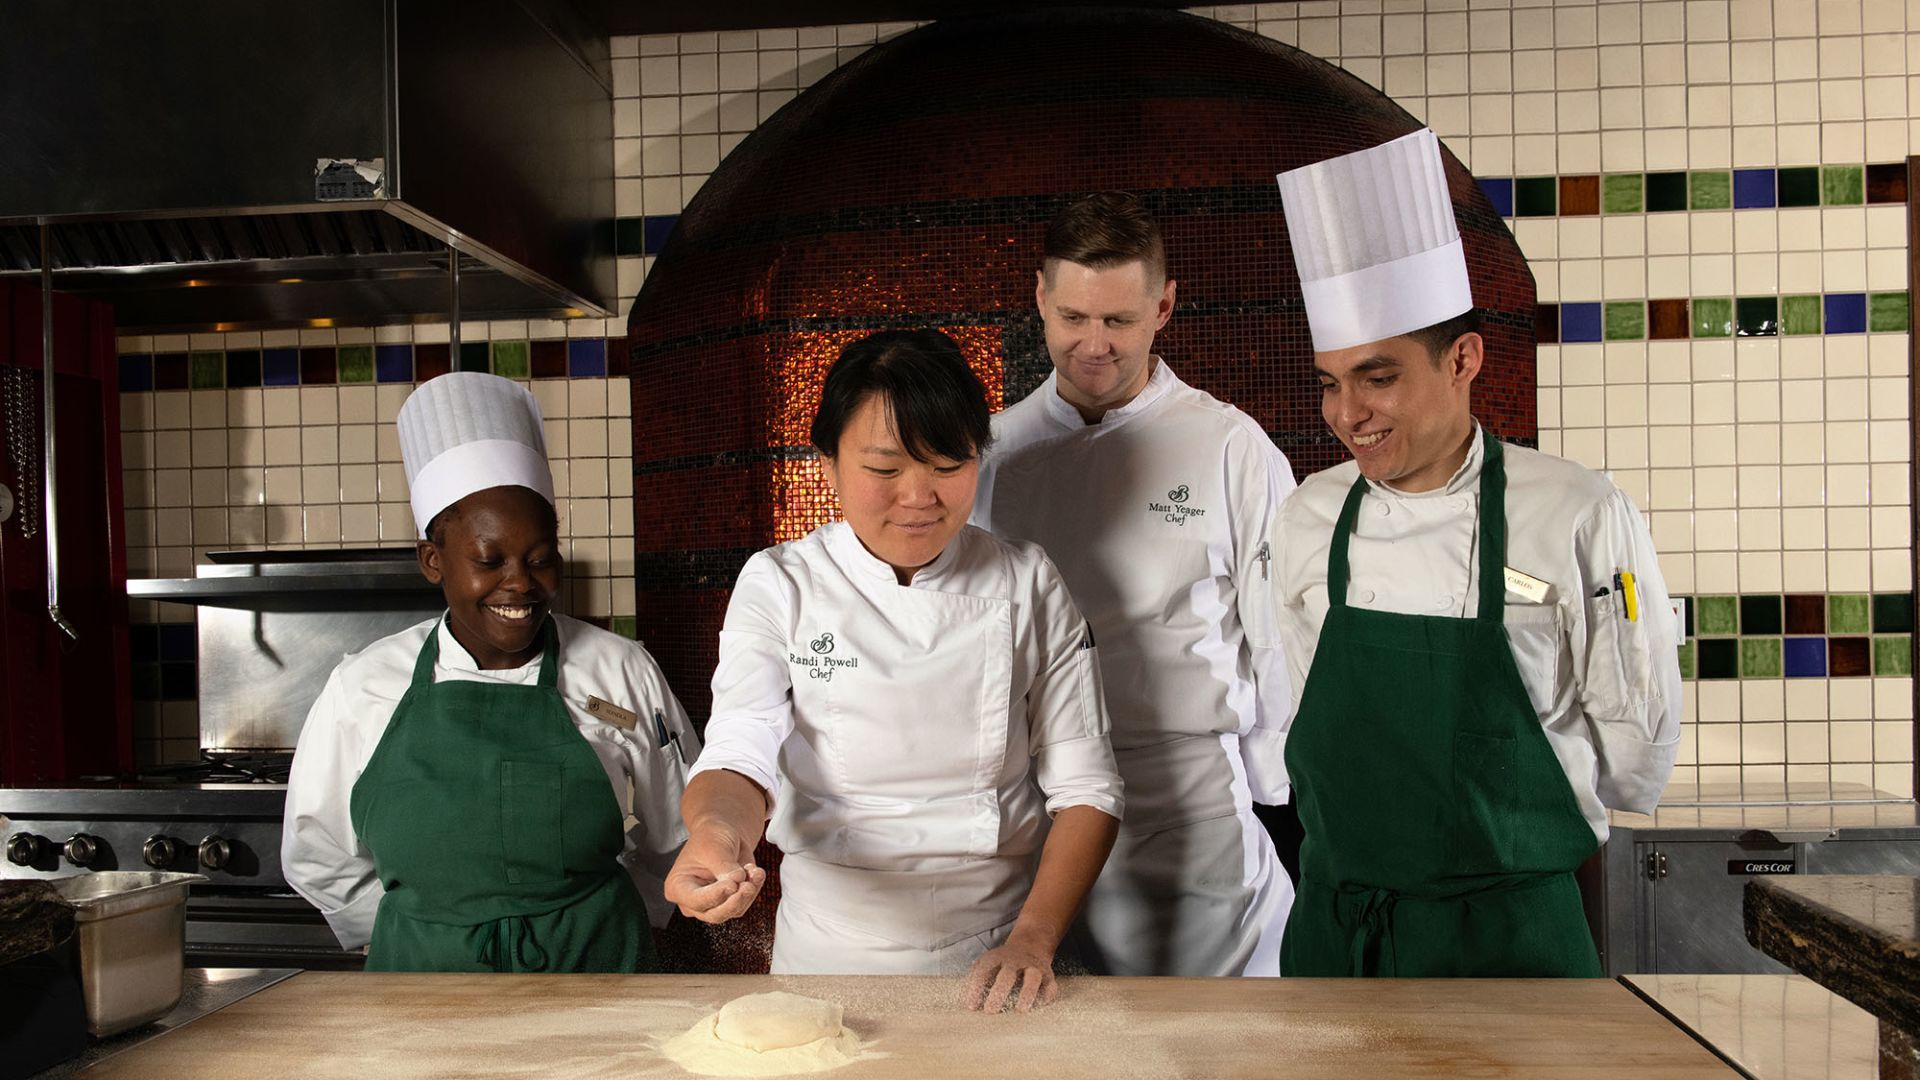 A Group Of Chefs In A Kitchen